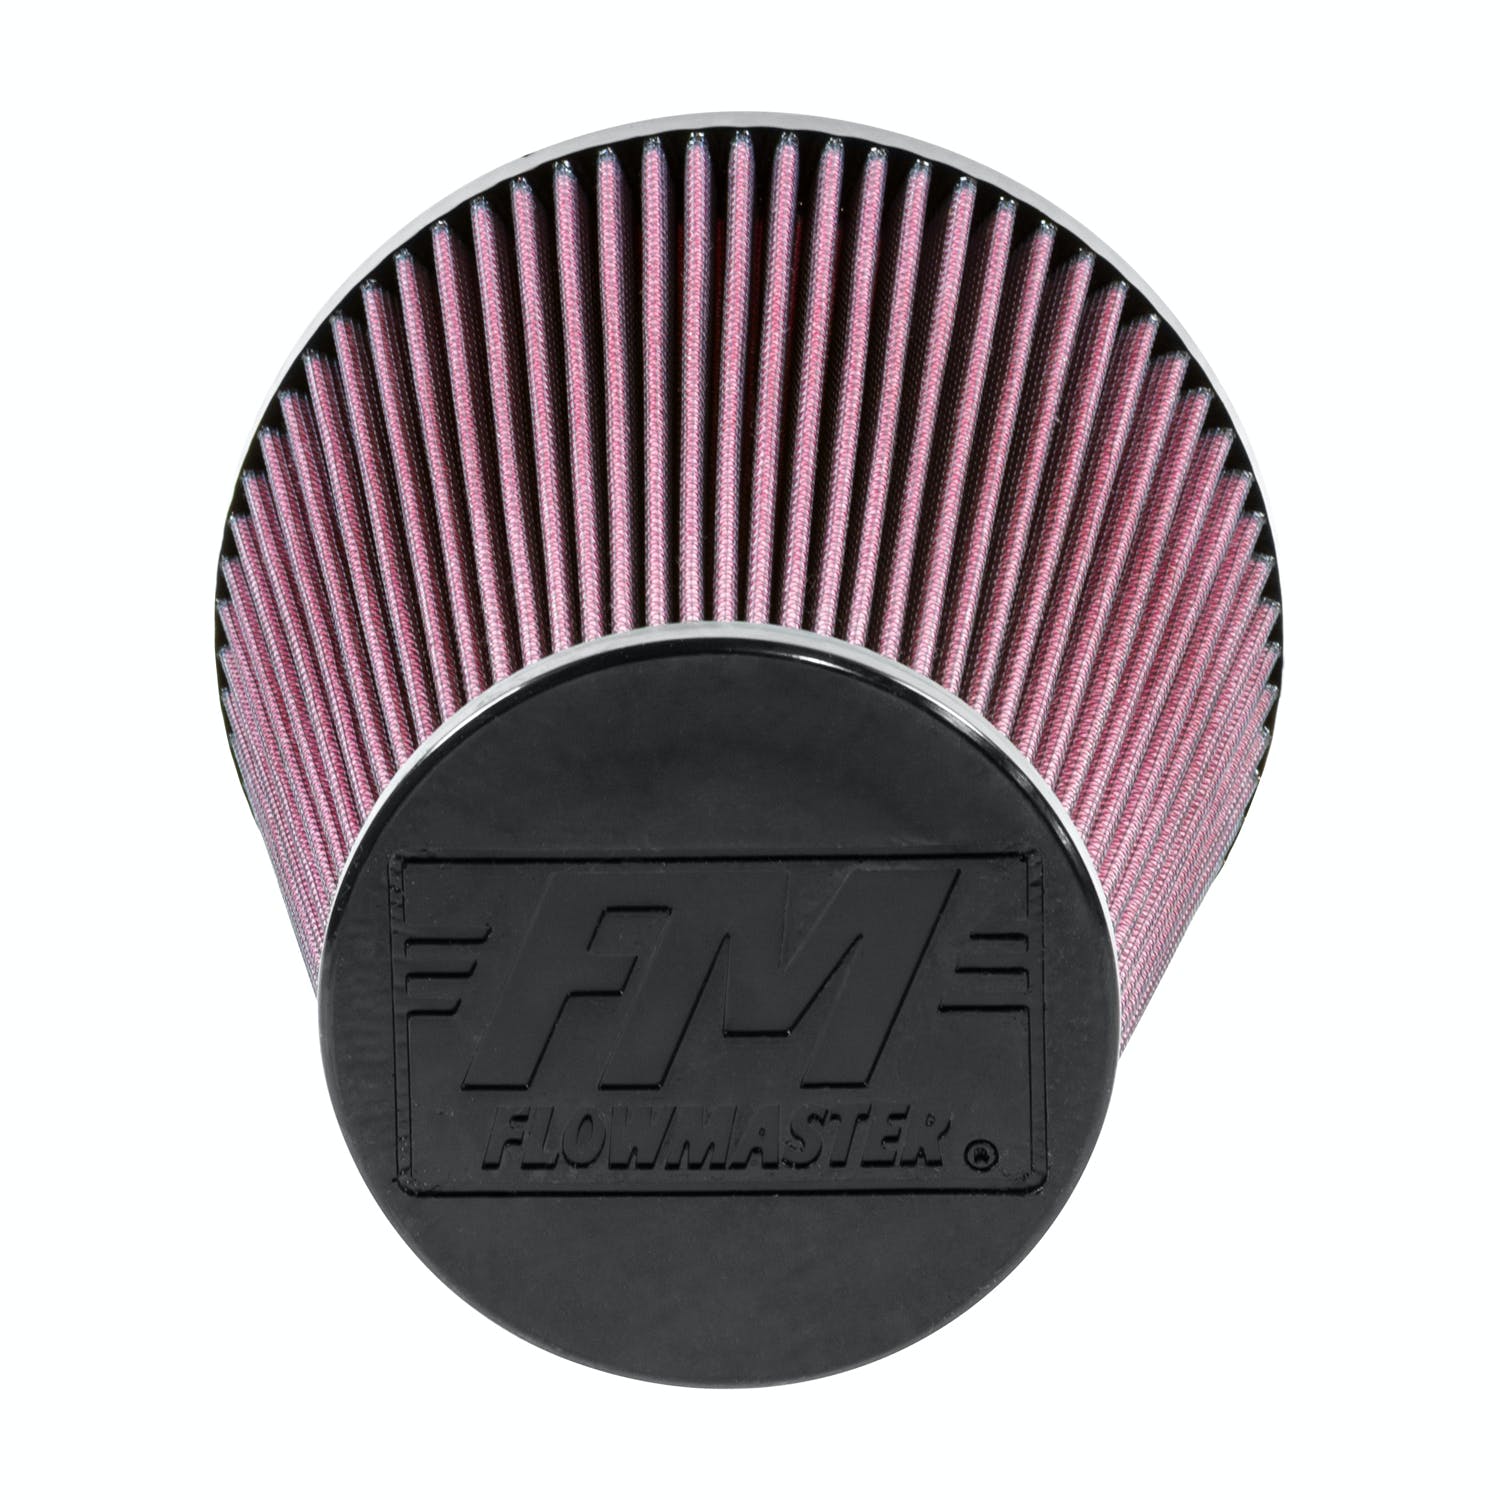 Flowmaster 615012 UNIVERSAL AIR FILTER, CONE, 6.0 IN x 8.6